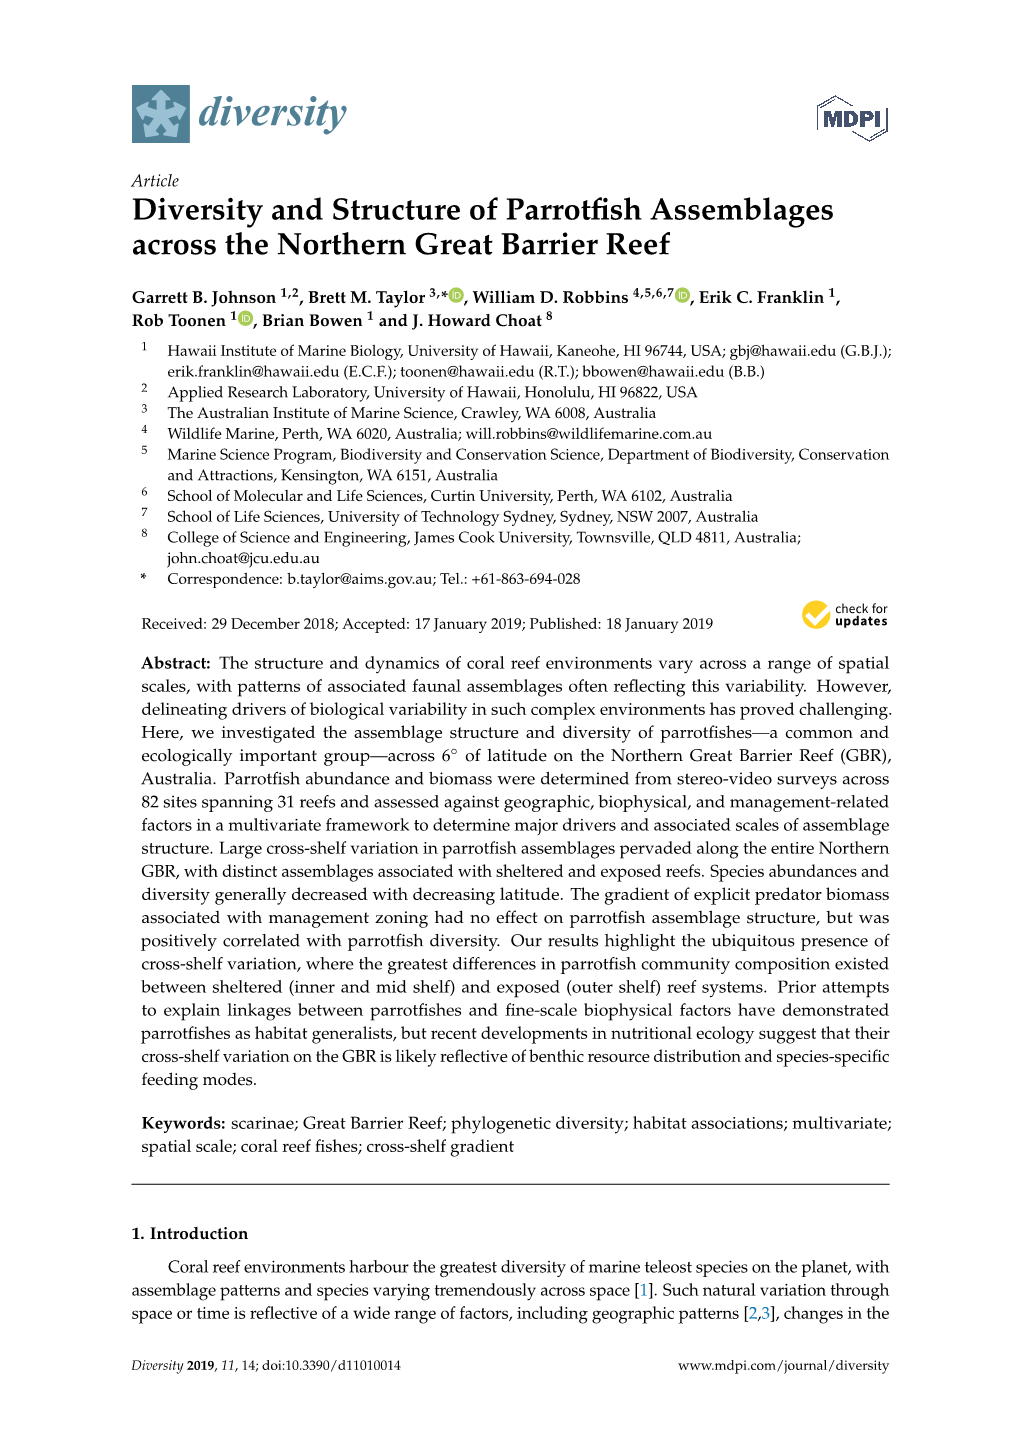 Diversity and Structure of Parrotfish Assemblages Across the Northern Great Barrier Reef